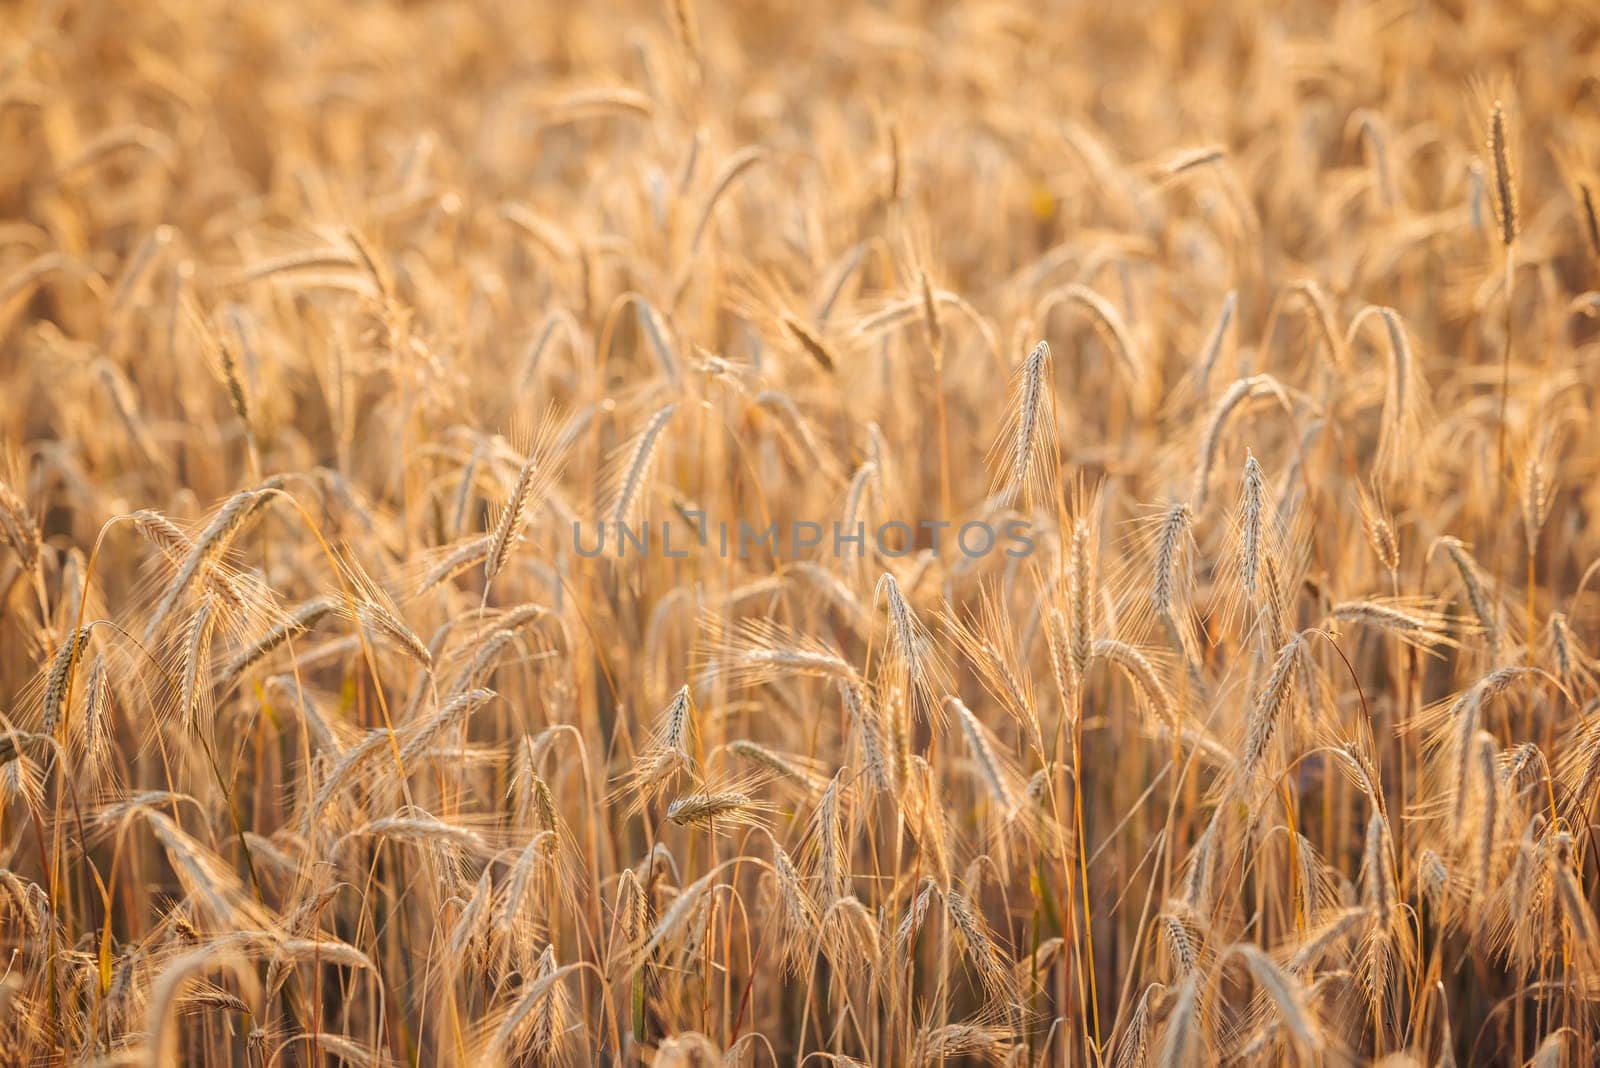 Gold spikelets of bread against setting sun, agricultural field ready for harvest